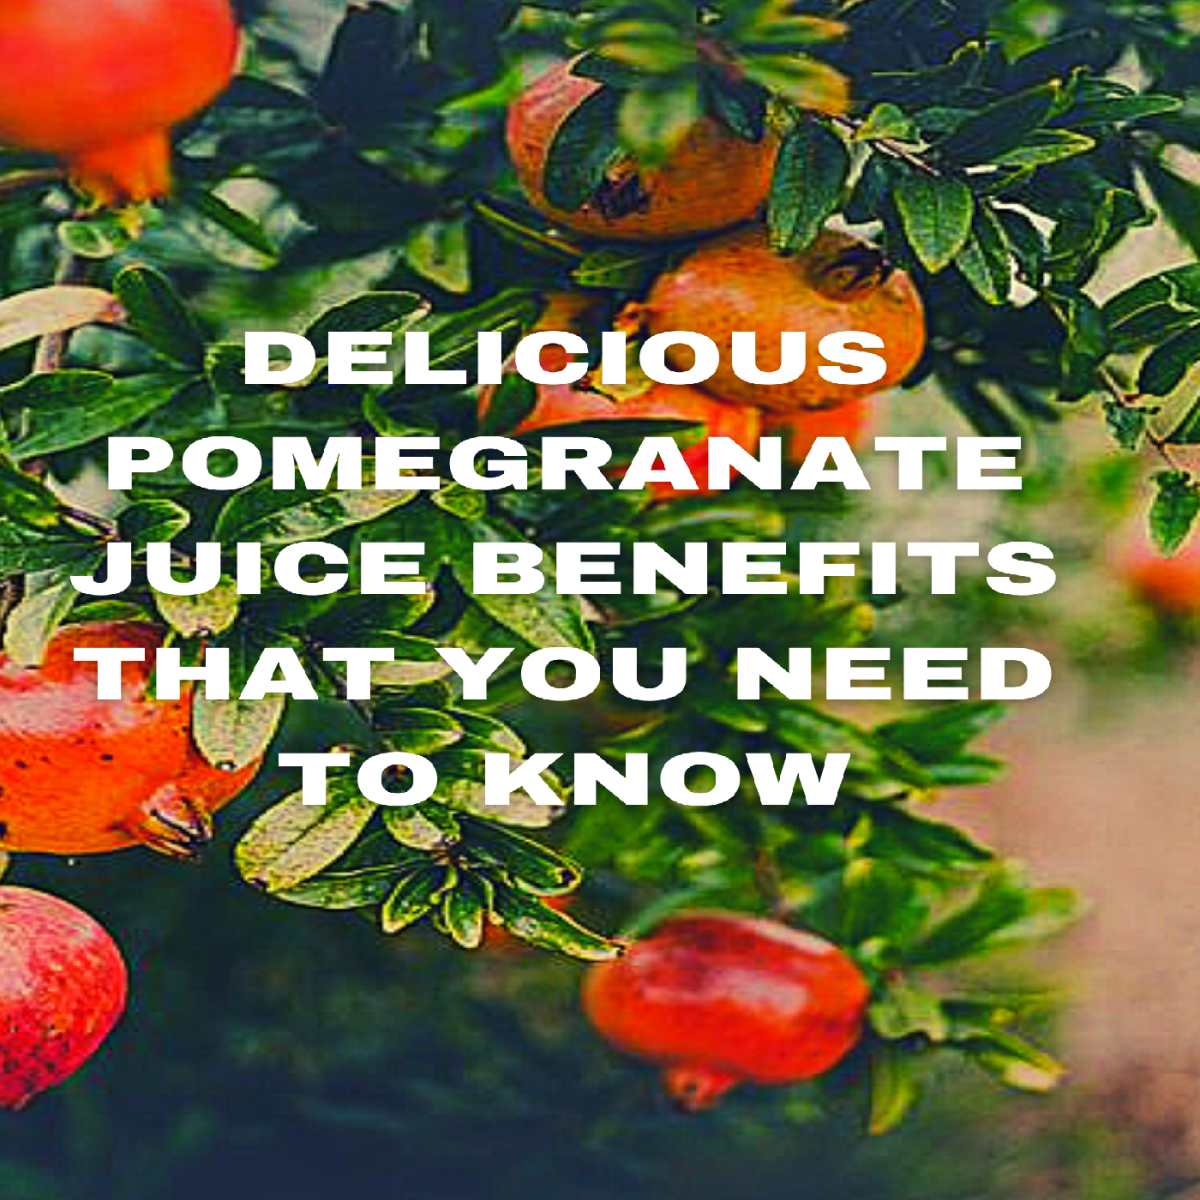 Delicious Pomegranate Juice Benefits That You Need To Know